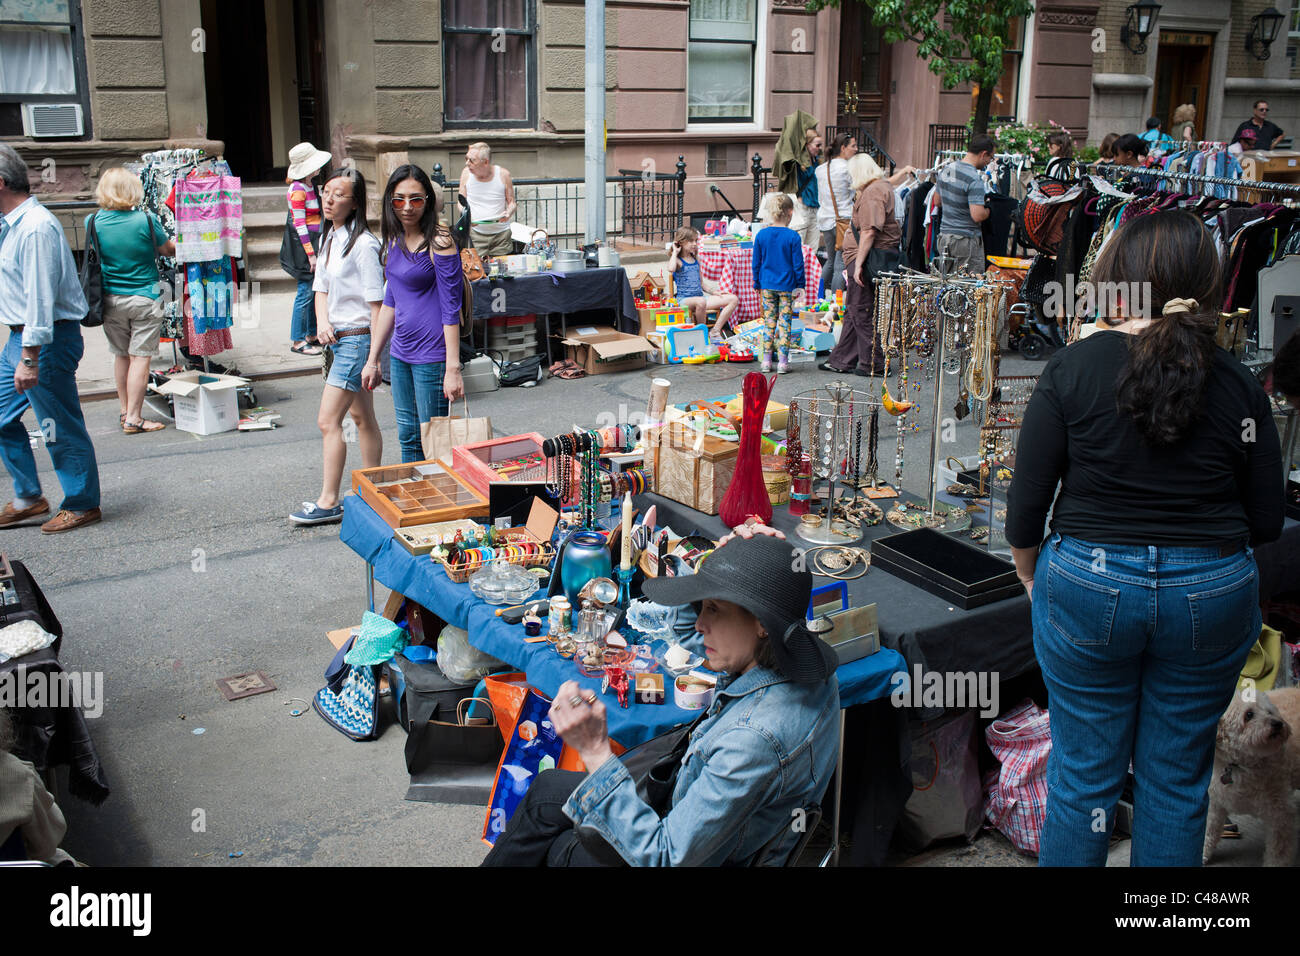 Shoppers search for bargains at the Jane Street Block Association Flea Market in the New York neighborhood of Greenwich Village Stock Photo